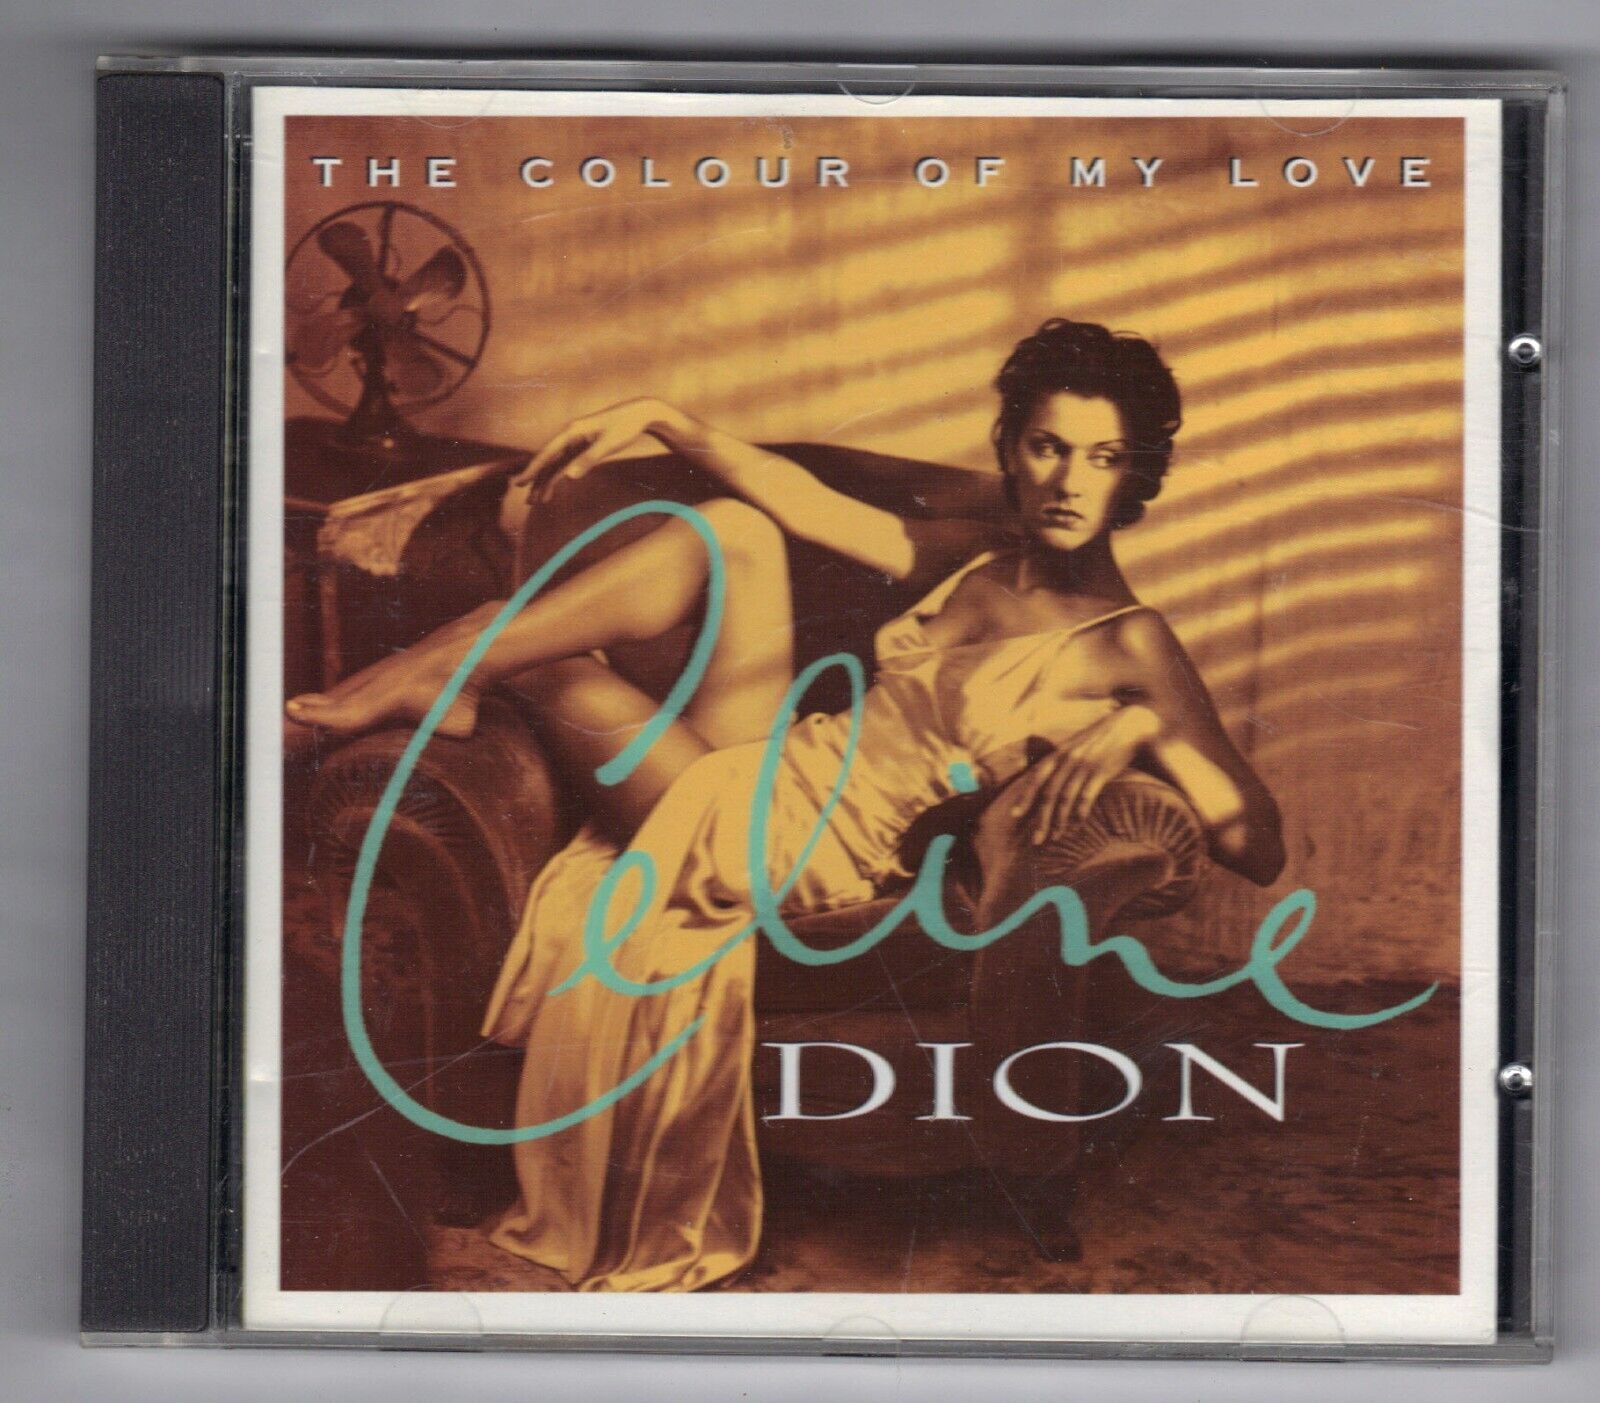 Primary image for The Colour of My Love by Céline Dion (CD, Nov-1993, 550 Music)